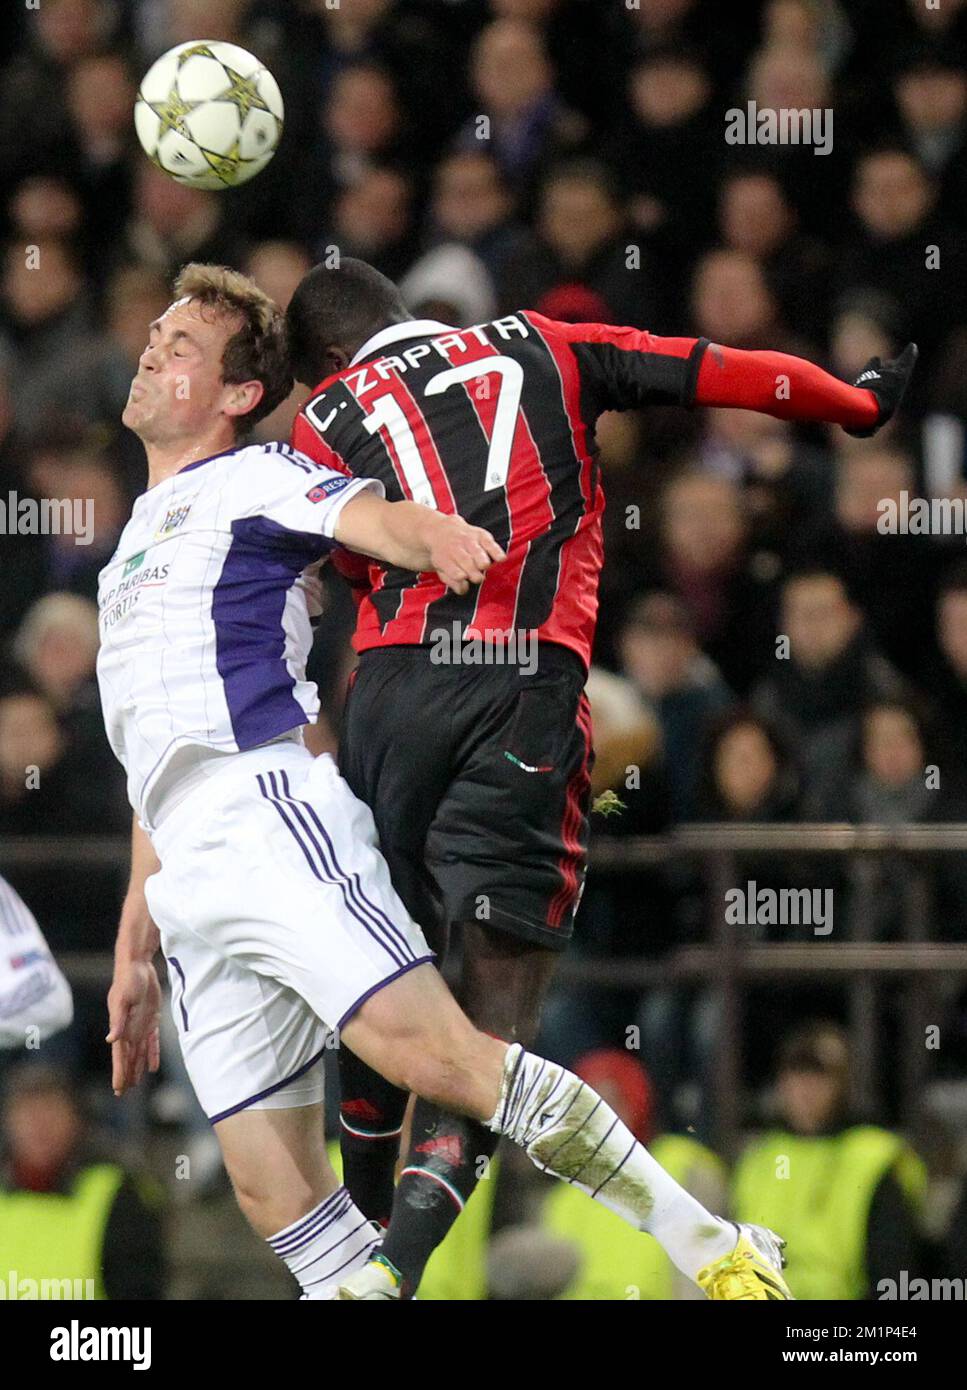 20121121 - BRUSSELS, BELGIUM: Anderlecht's Tom De Sutter and Milan's Cristian Zapata fight for the ball during the football game between Belgian RSC Anderlecht and Italian AC Milan, on the fifth day of the group C of Champions League group C Wednesday 21 November 2012 in Brussels.  BELGA PHOTO VIRGINIE LEFOUR Stock Photo